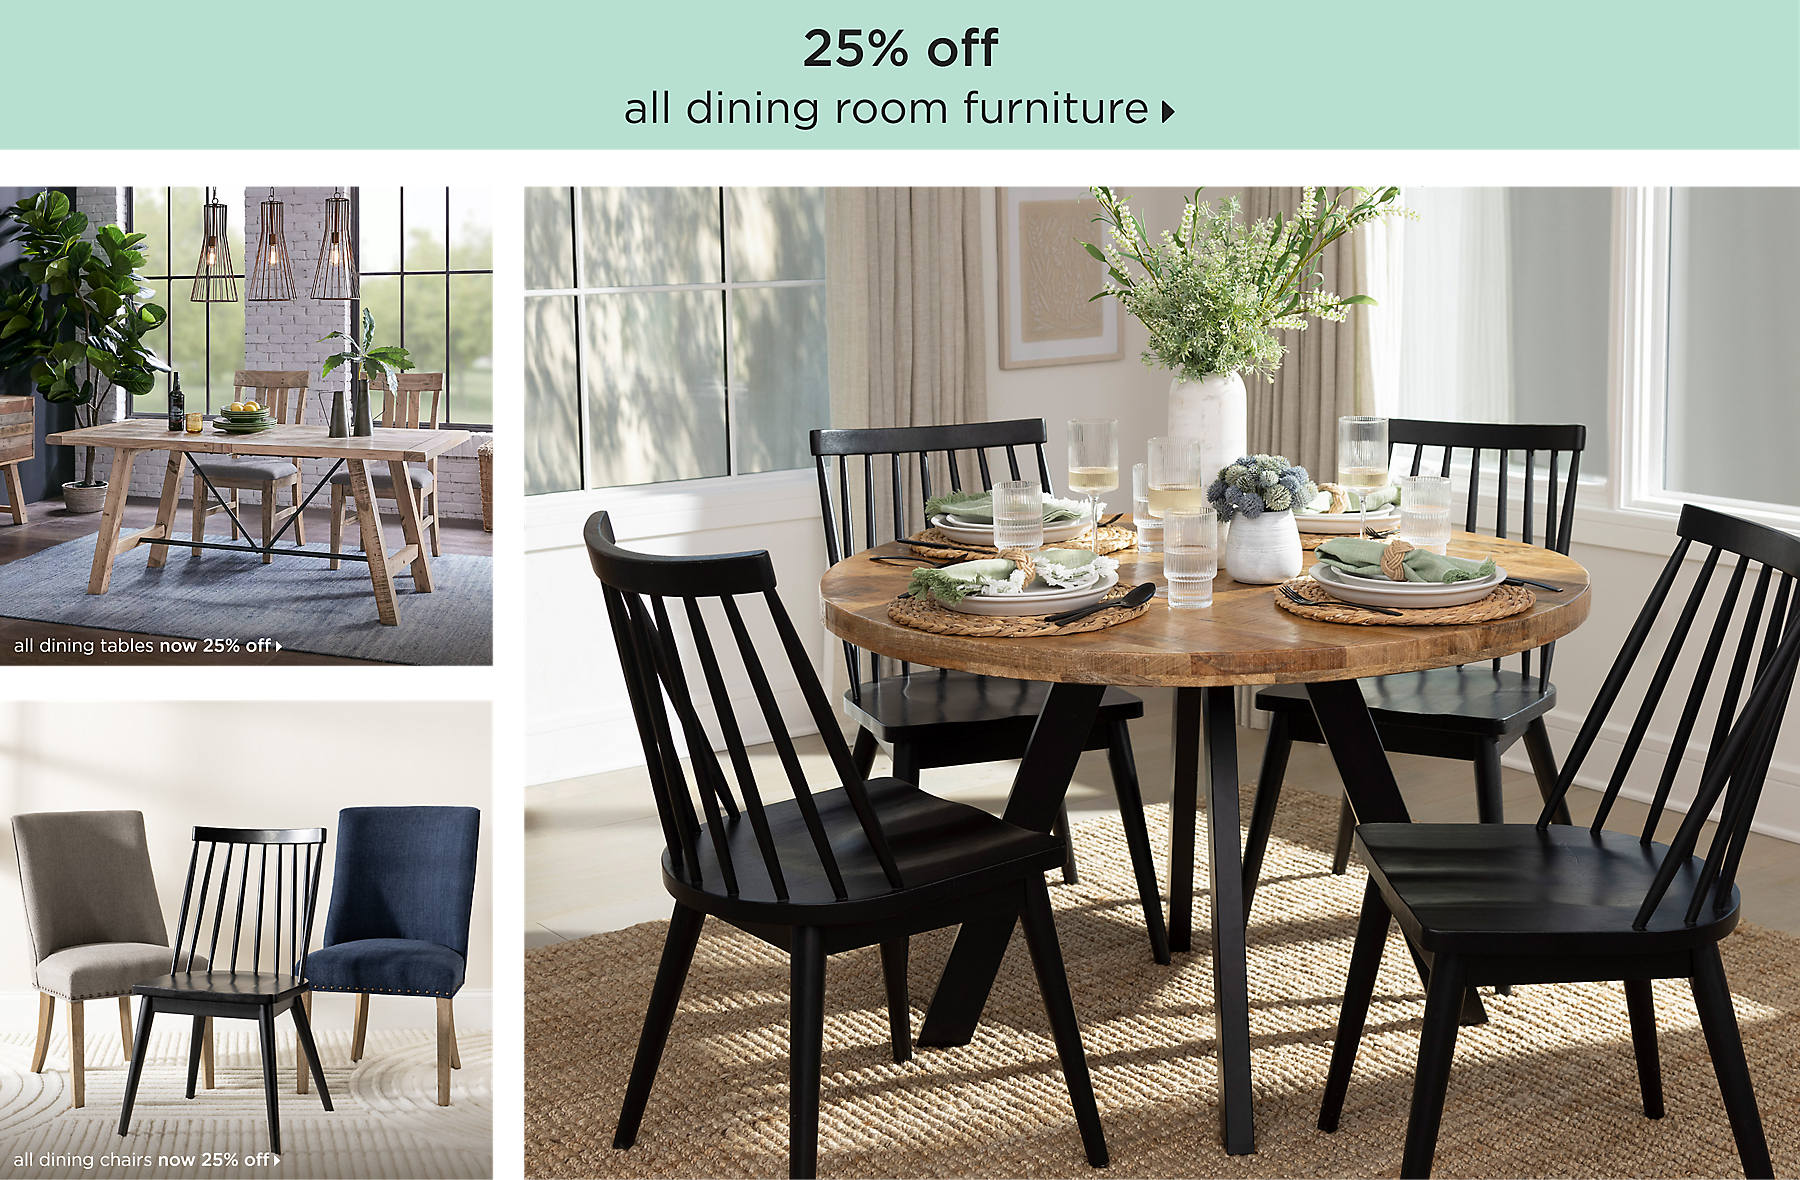 all dining room furniture 25% off shop now all dining tables now 25% off all dining chairs now 25% off